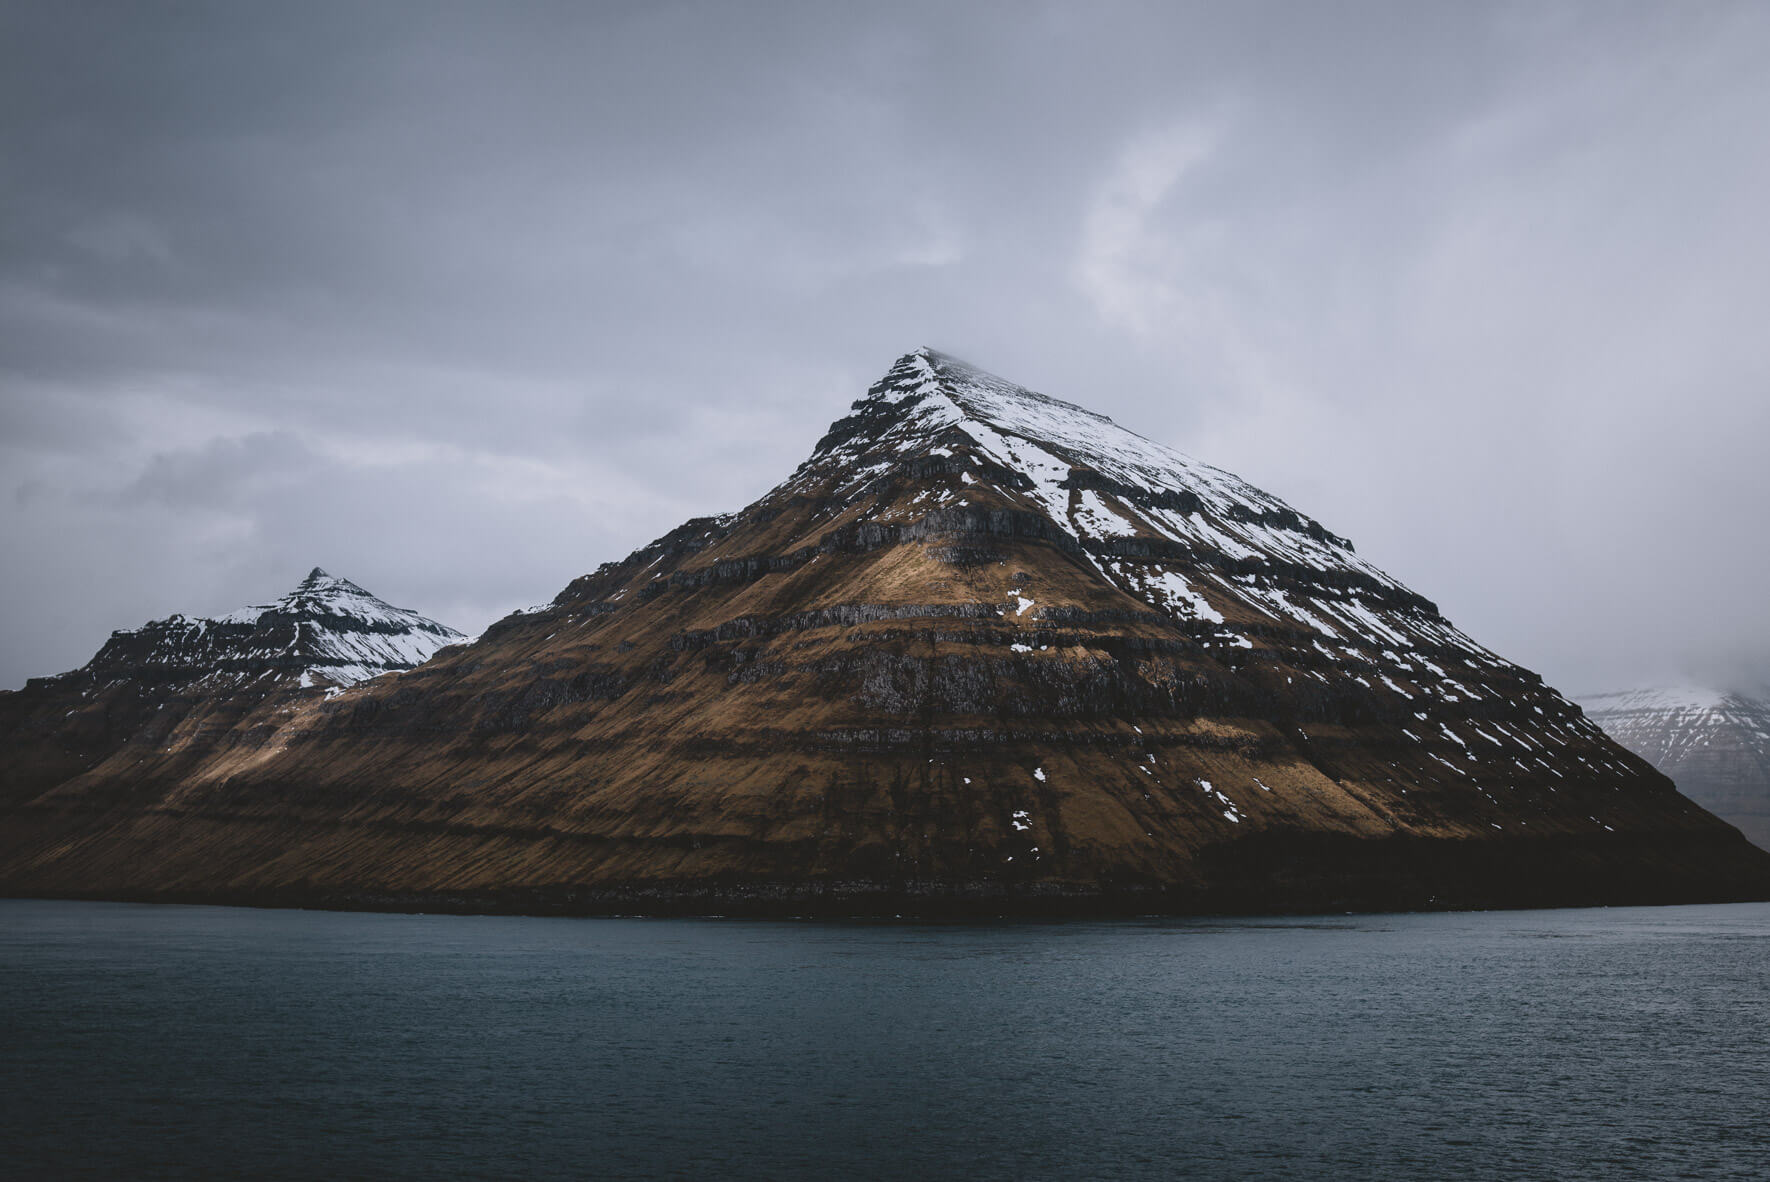 Landscape photography of the Faroe Islands by fine art and commercial photographer Jan Erik Waider